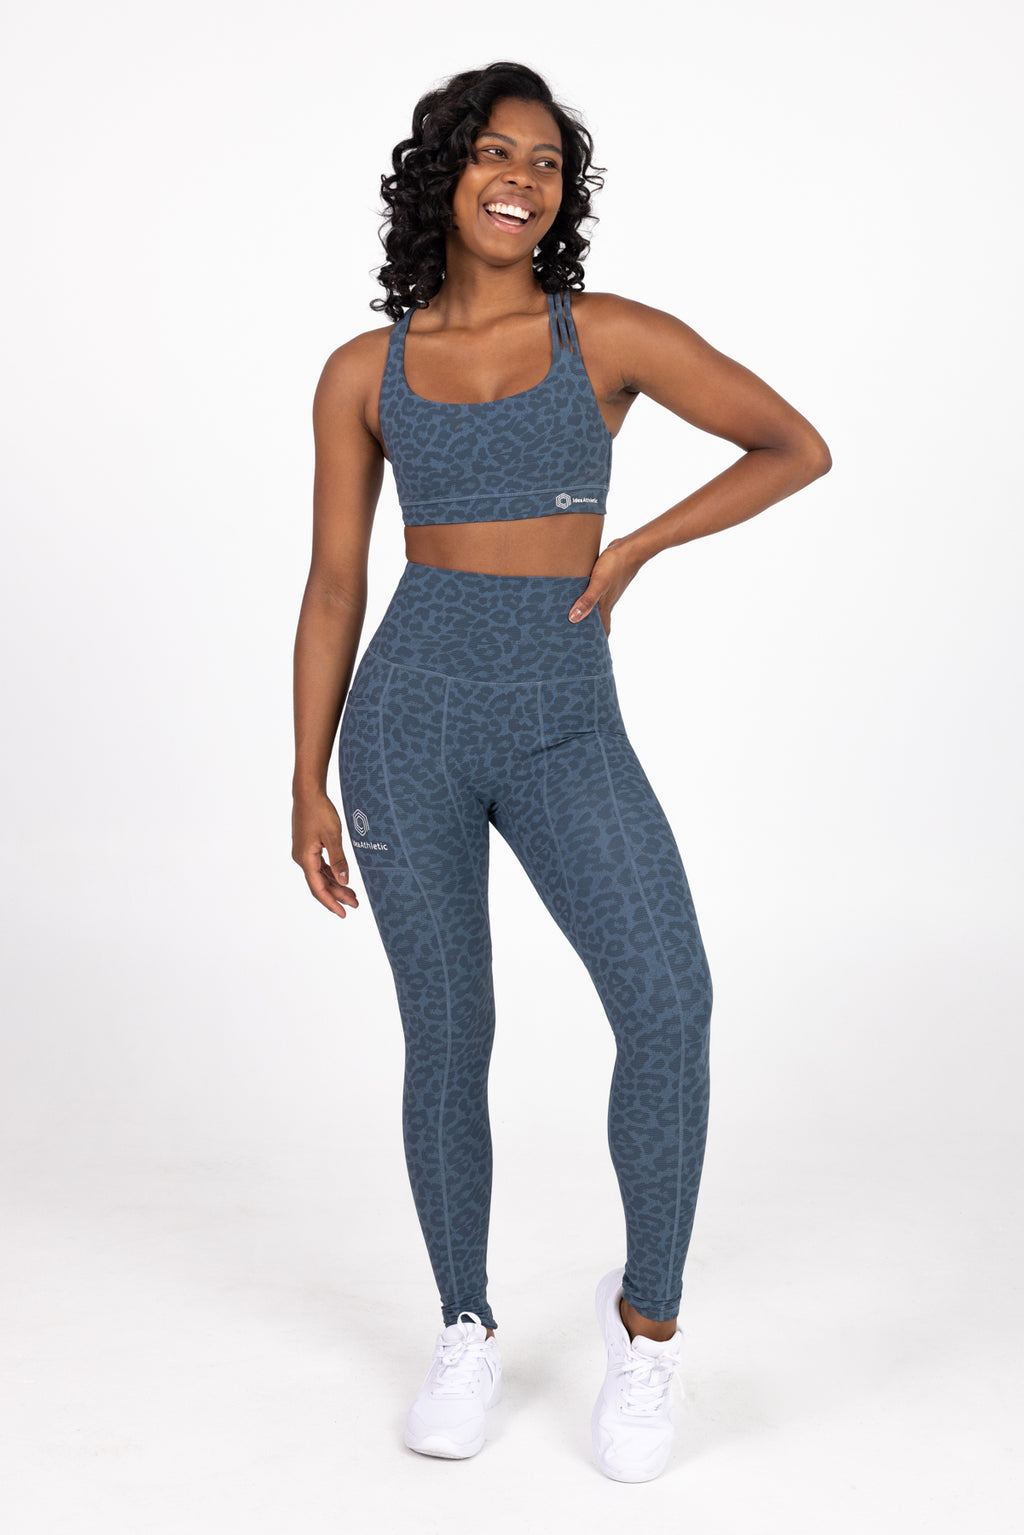 invisiSweat Full Length Tights - High Waisted Blue Leopard